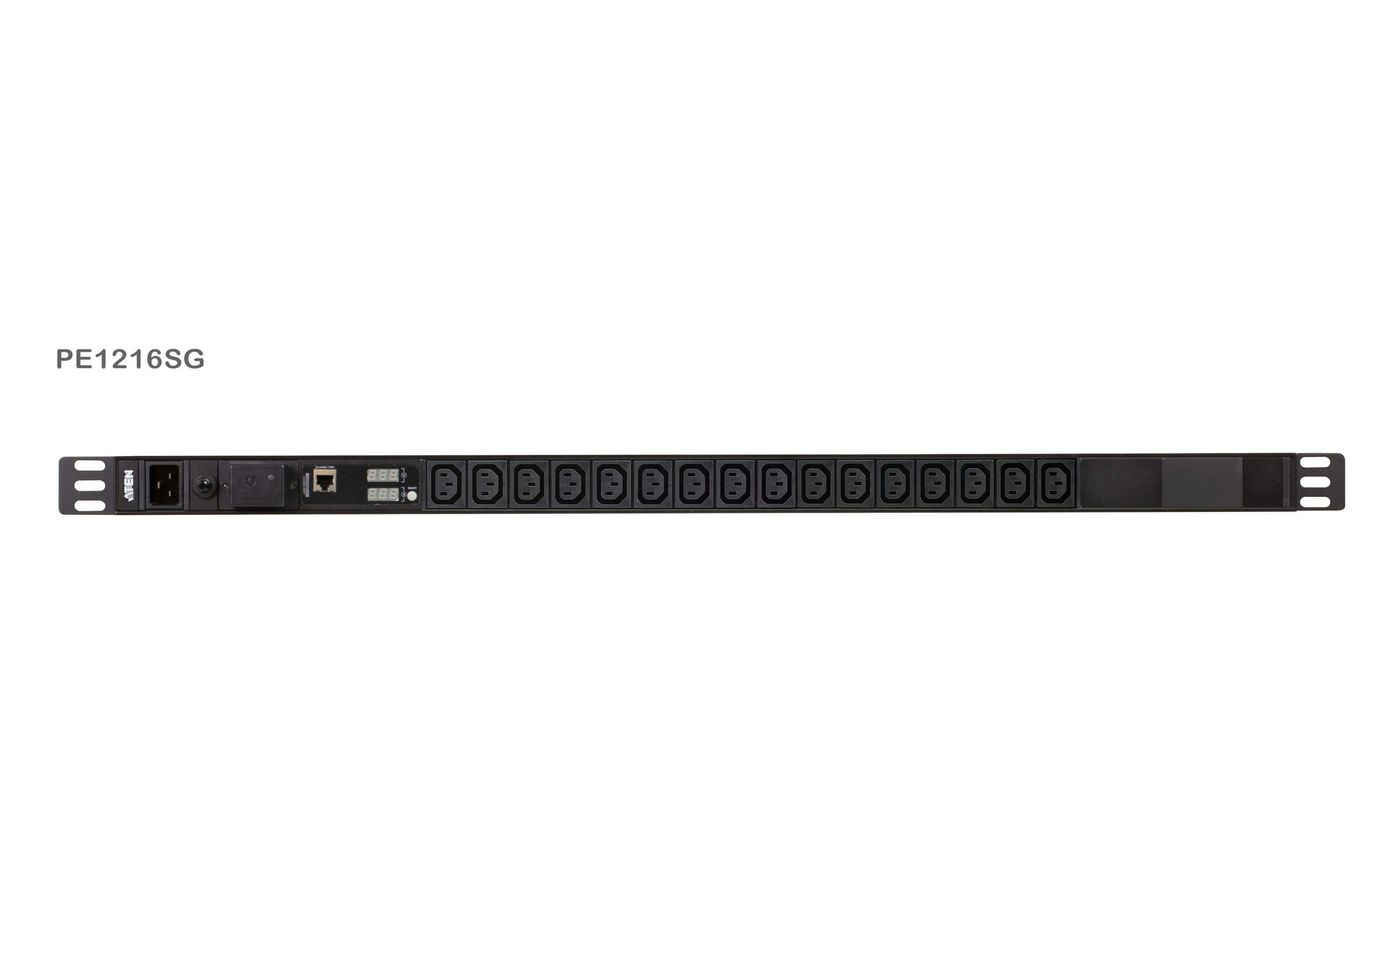 Aten PE1216SG-AT-G W127285137 16-Outlet 0U PDU with Current 